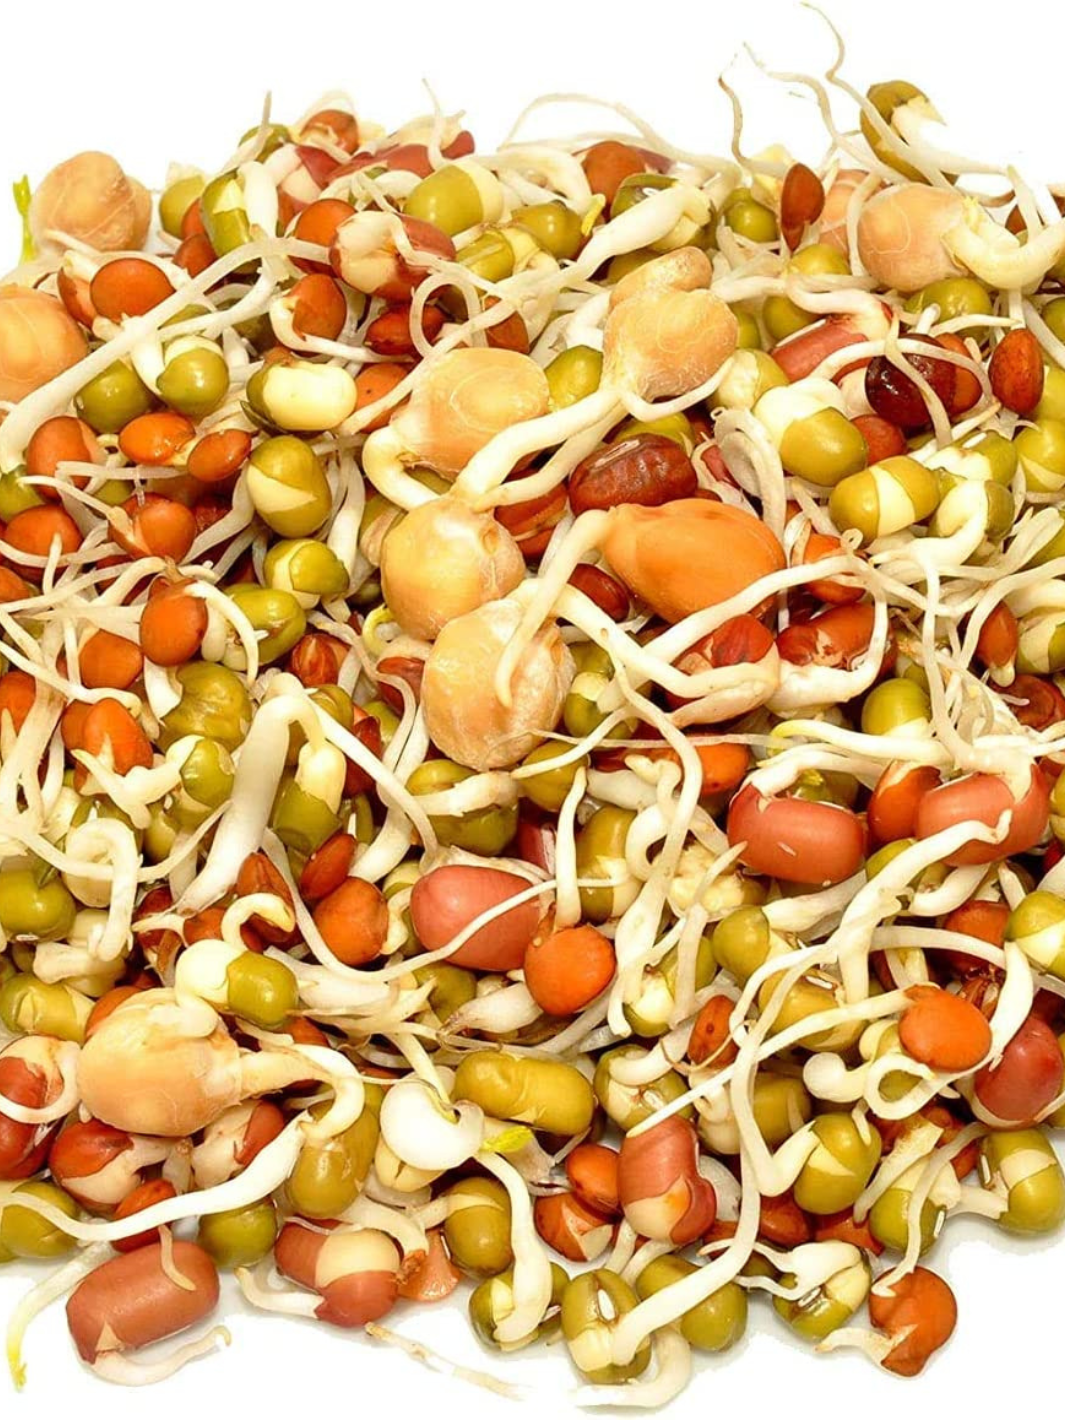 Closeup of Sprouted Handy Pantry Organic Protein Powerhouse Mix Sprouting Seeds